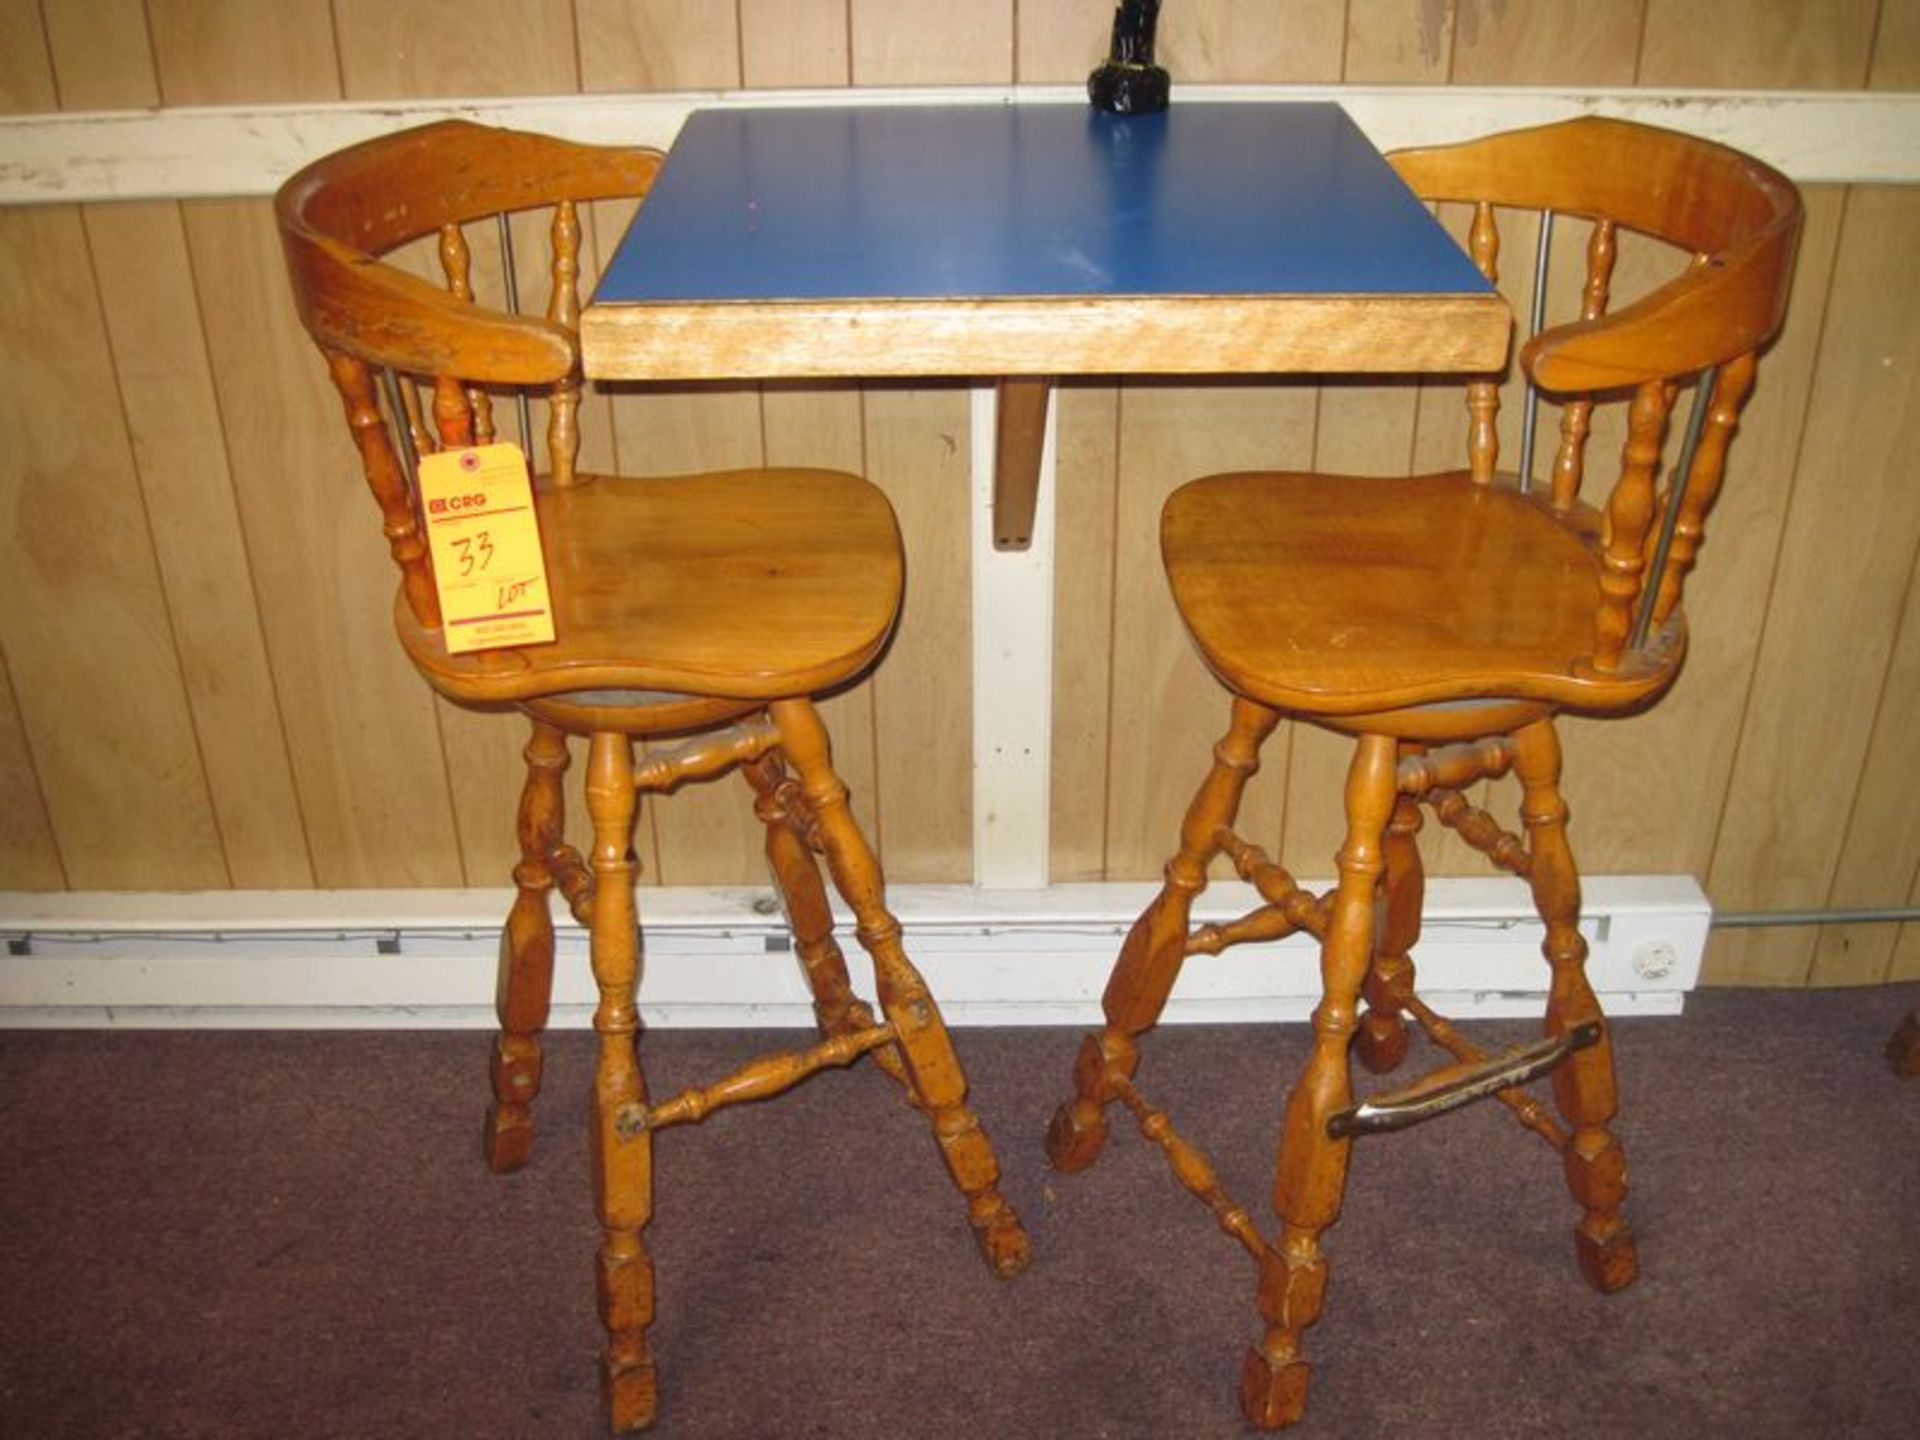 Lot (2) bar stools and table top